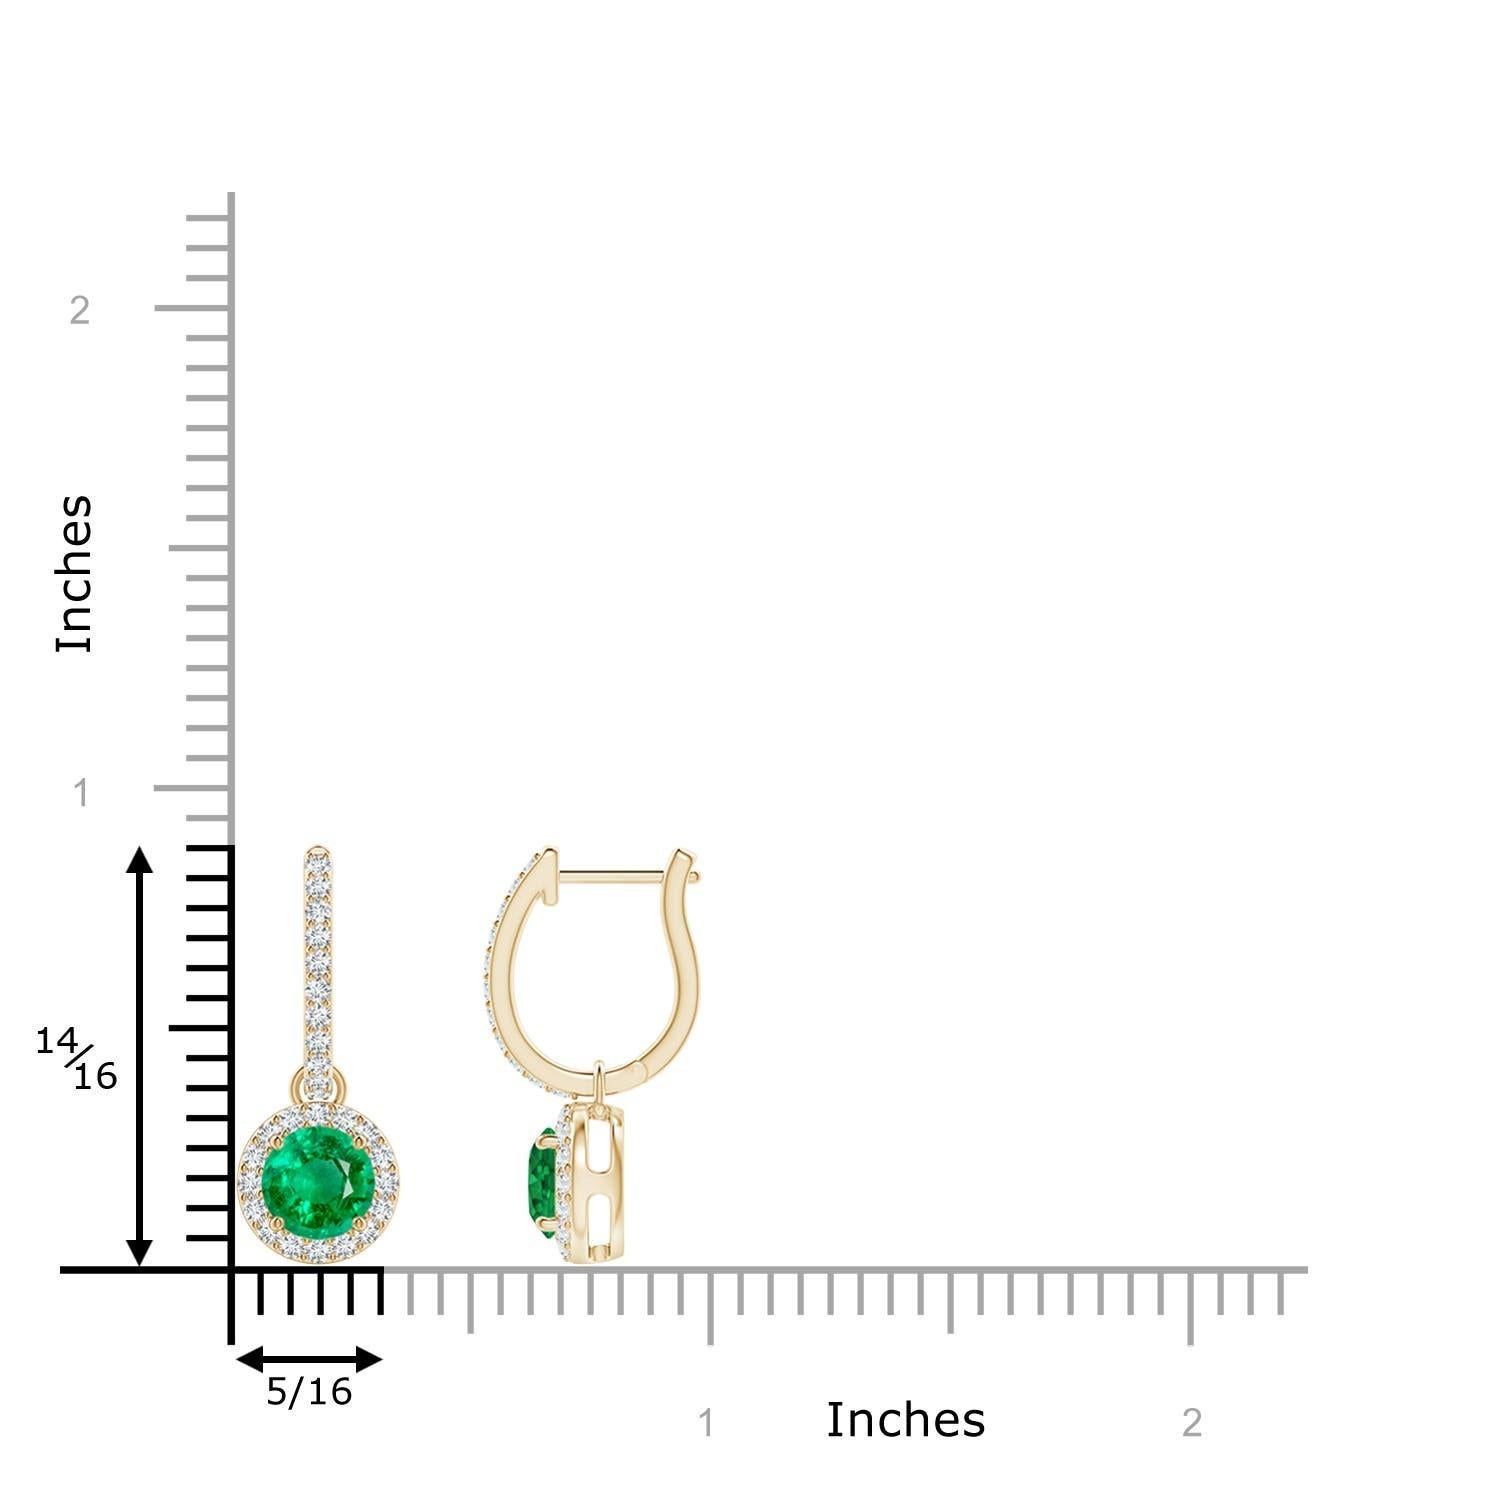 Nestled within a glimmering halo of round diamonds are round lush green emeralds in prong settings. The diamond accents on the hoop lend an additional touch of elegance to these emerald dangle earrings crafted in 14k yellow gold.
Emerald is the